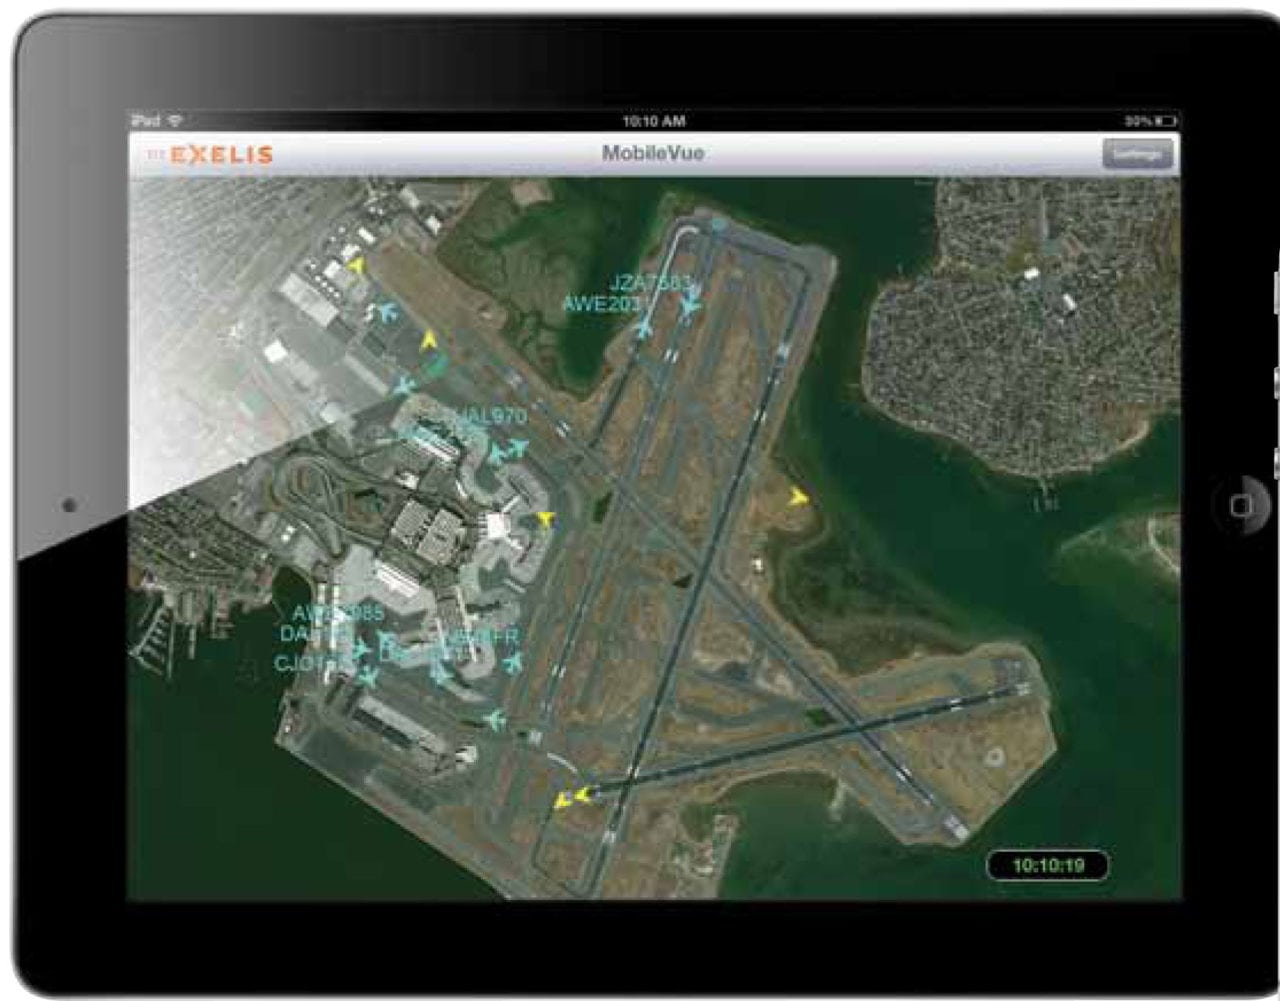 MobileVue, part of the airfield monitoring solution Exelis will provide to LAX